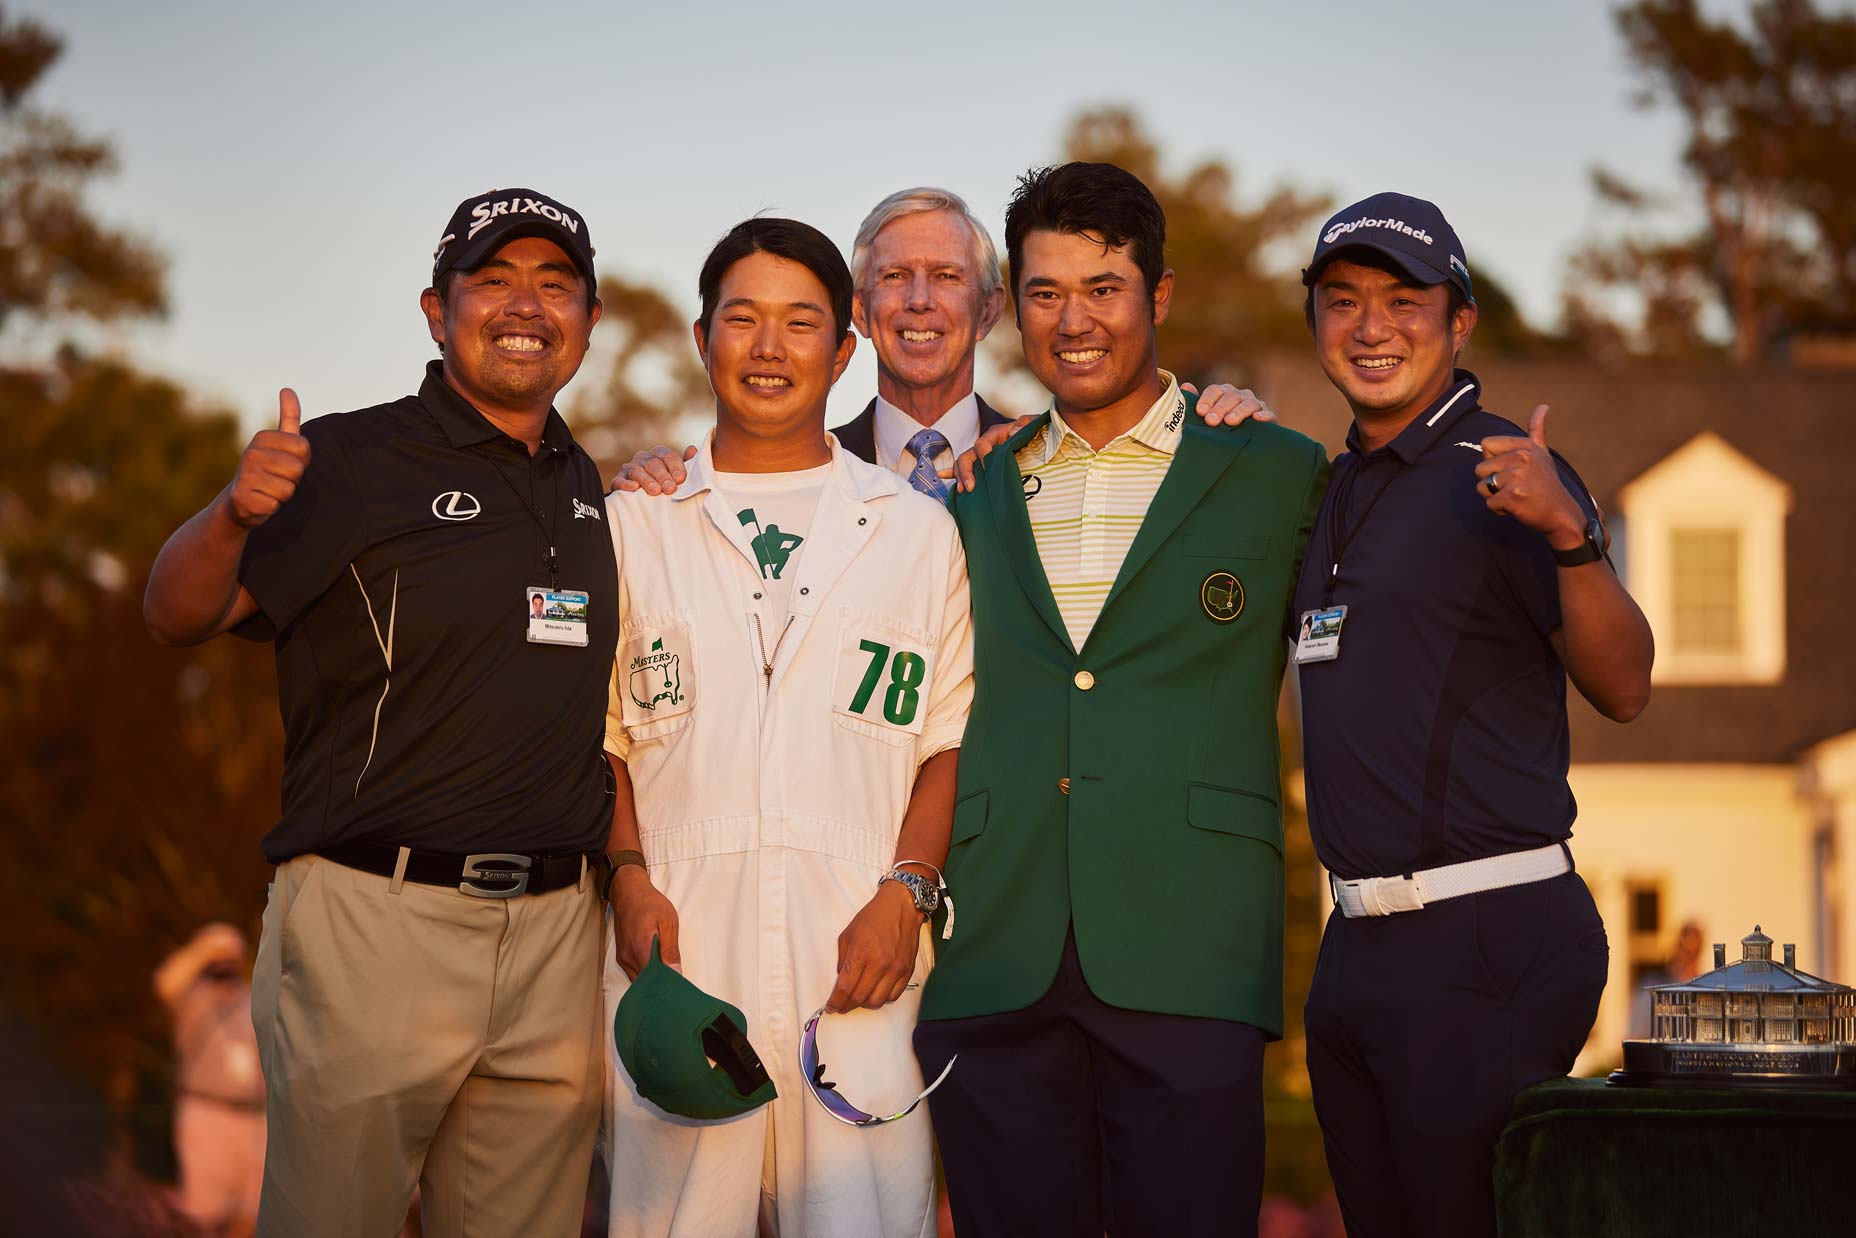 Masters photos: 29 exclusive pictures from historic final round at Augusta